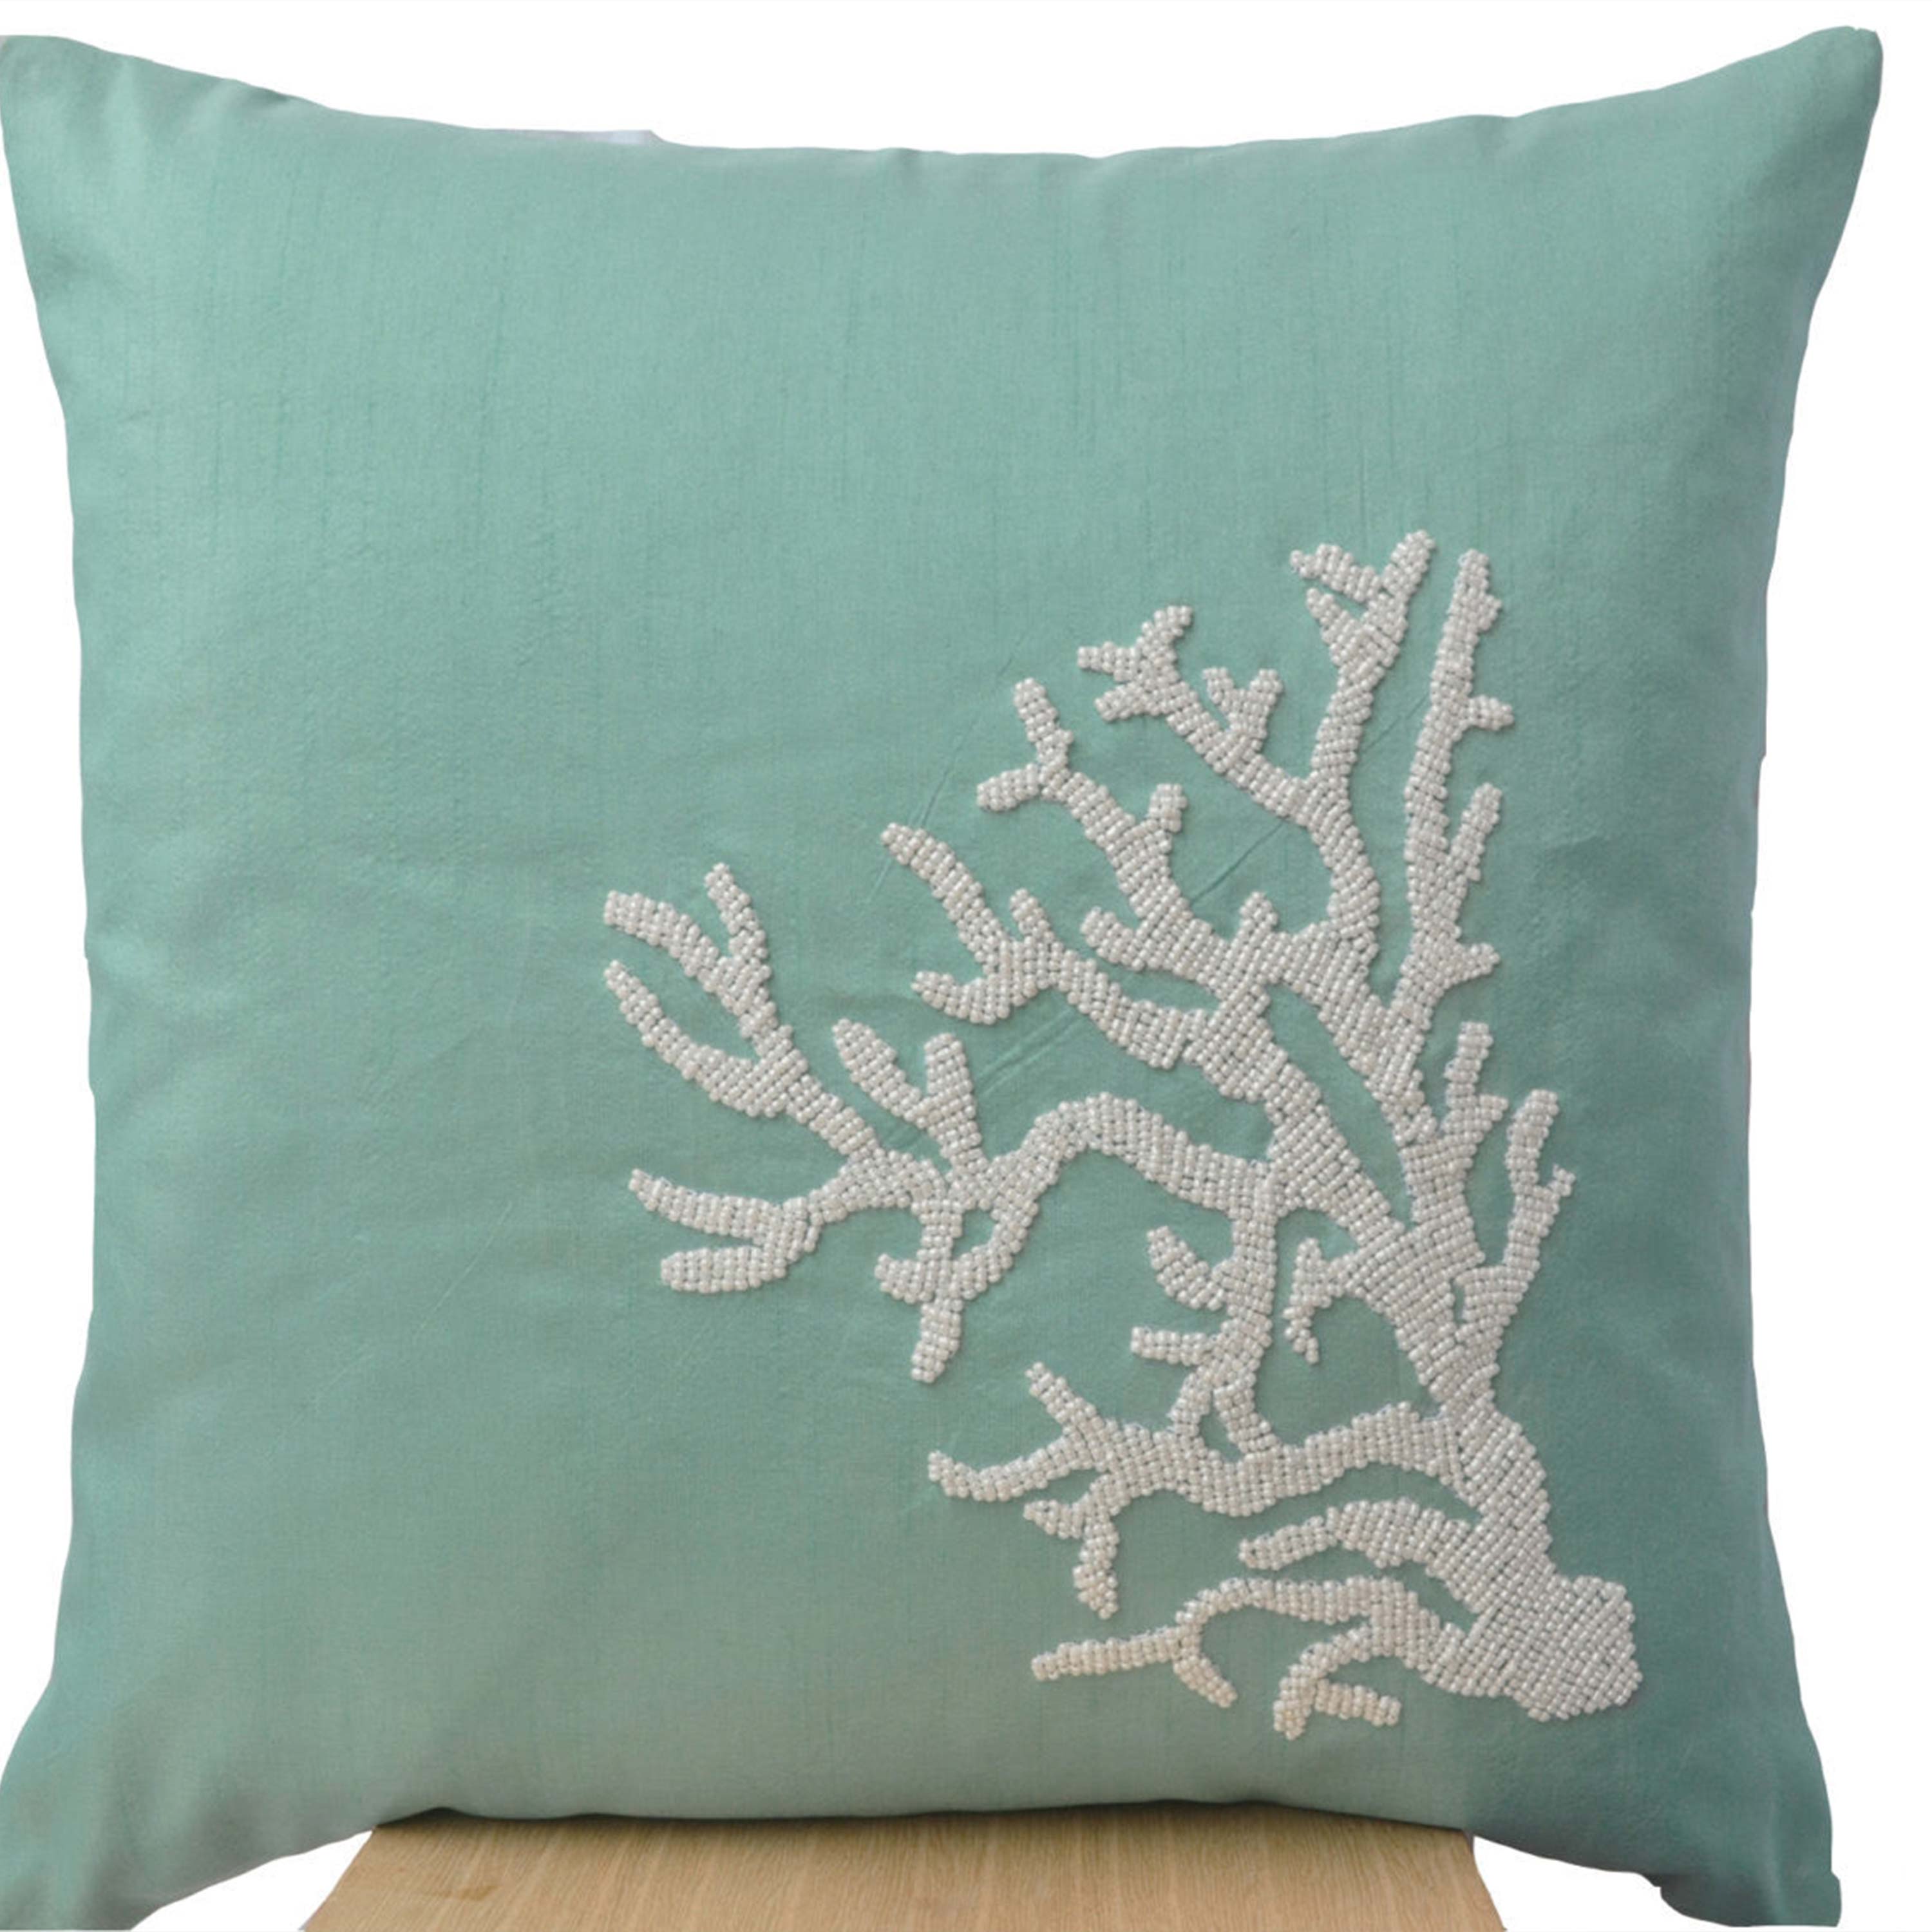 Teal Decorative pillow with white coral in beads -Oceanic pillows -Teal cushion -Embroidered Pillow- 16X16-Couch pillows -Coral reef pillow